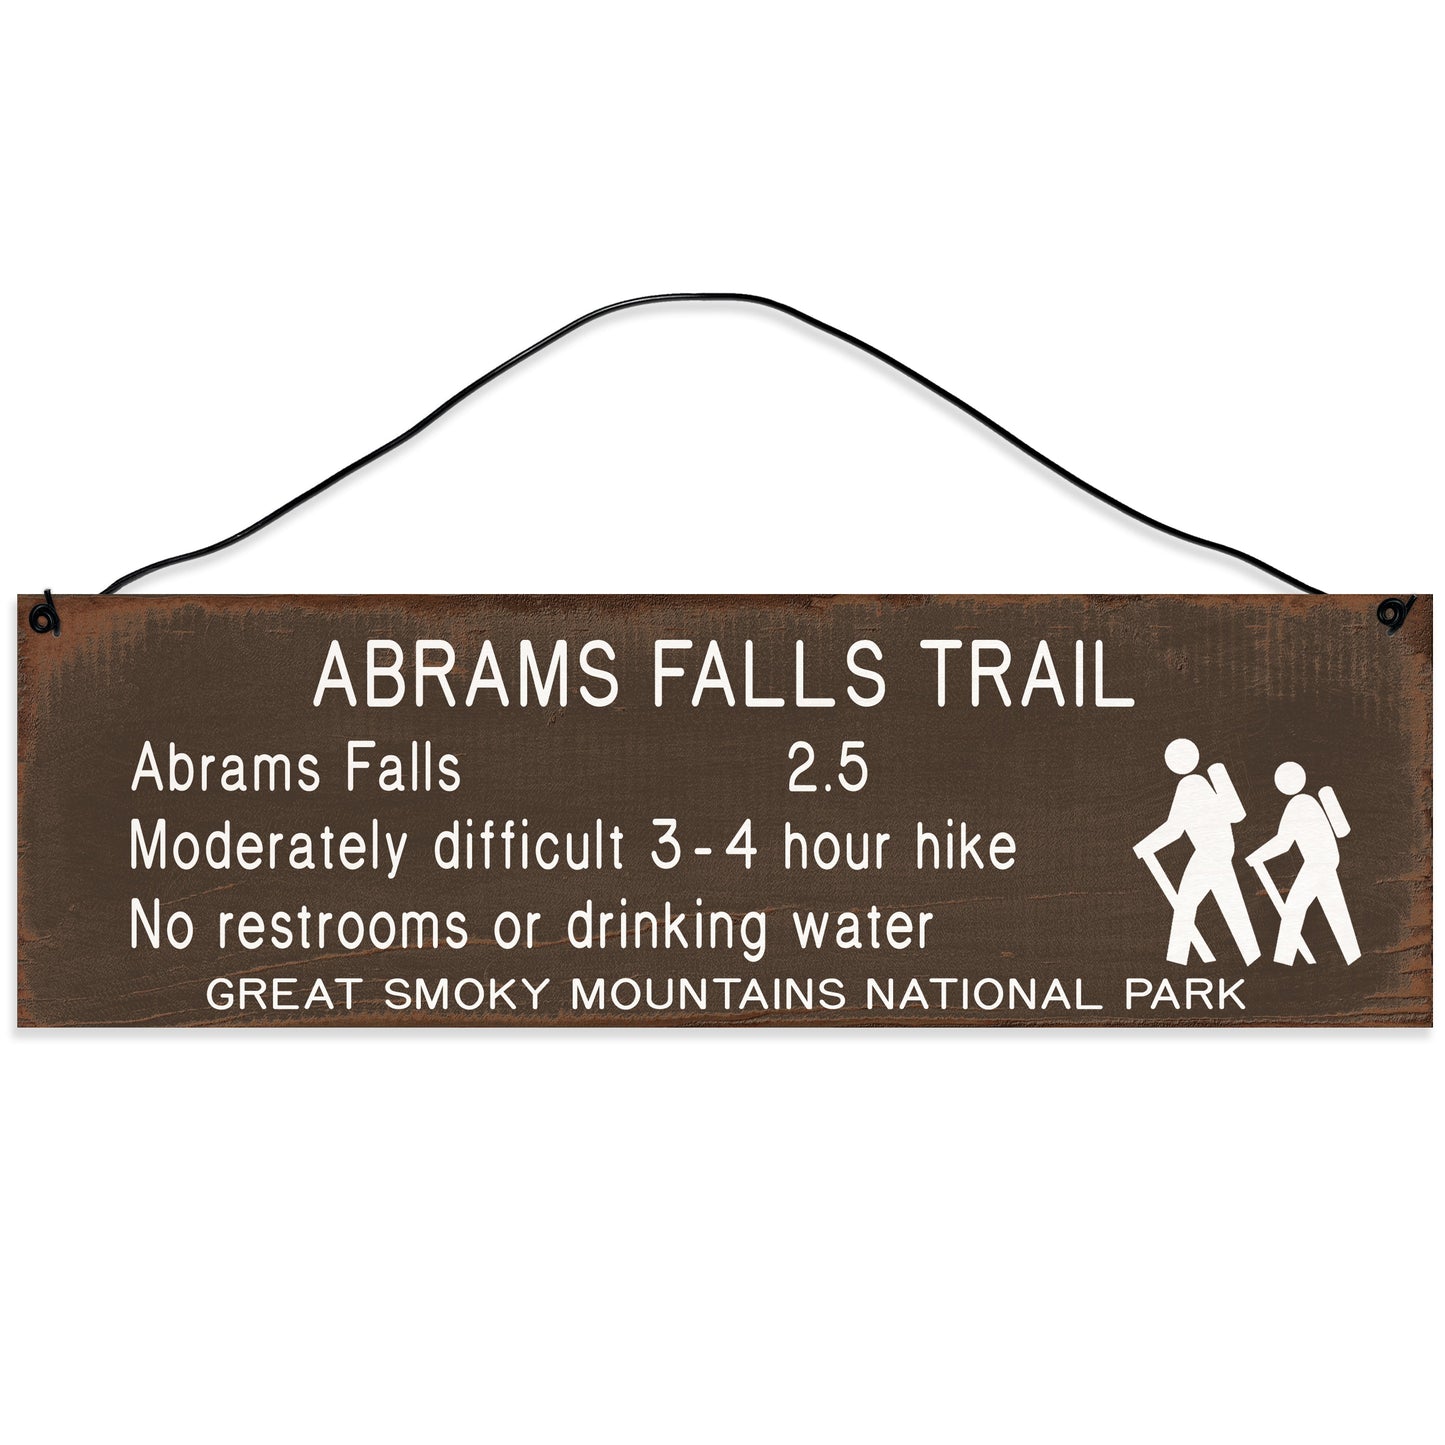 Sawyer's Mill - Abrams Falls Trail Marker Wood Sign for Home or Office. Measures 3x10 inches.